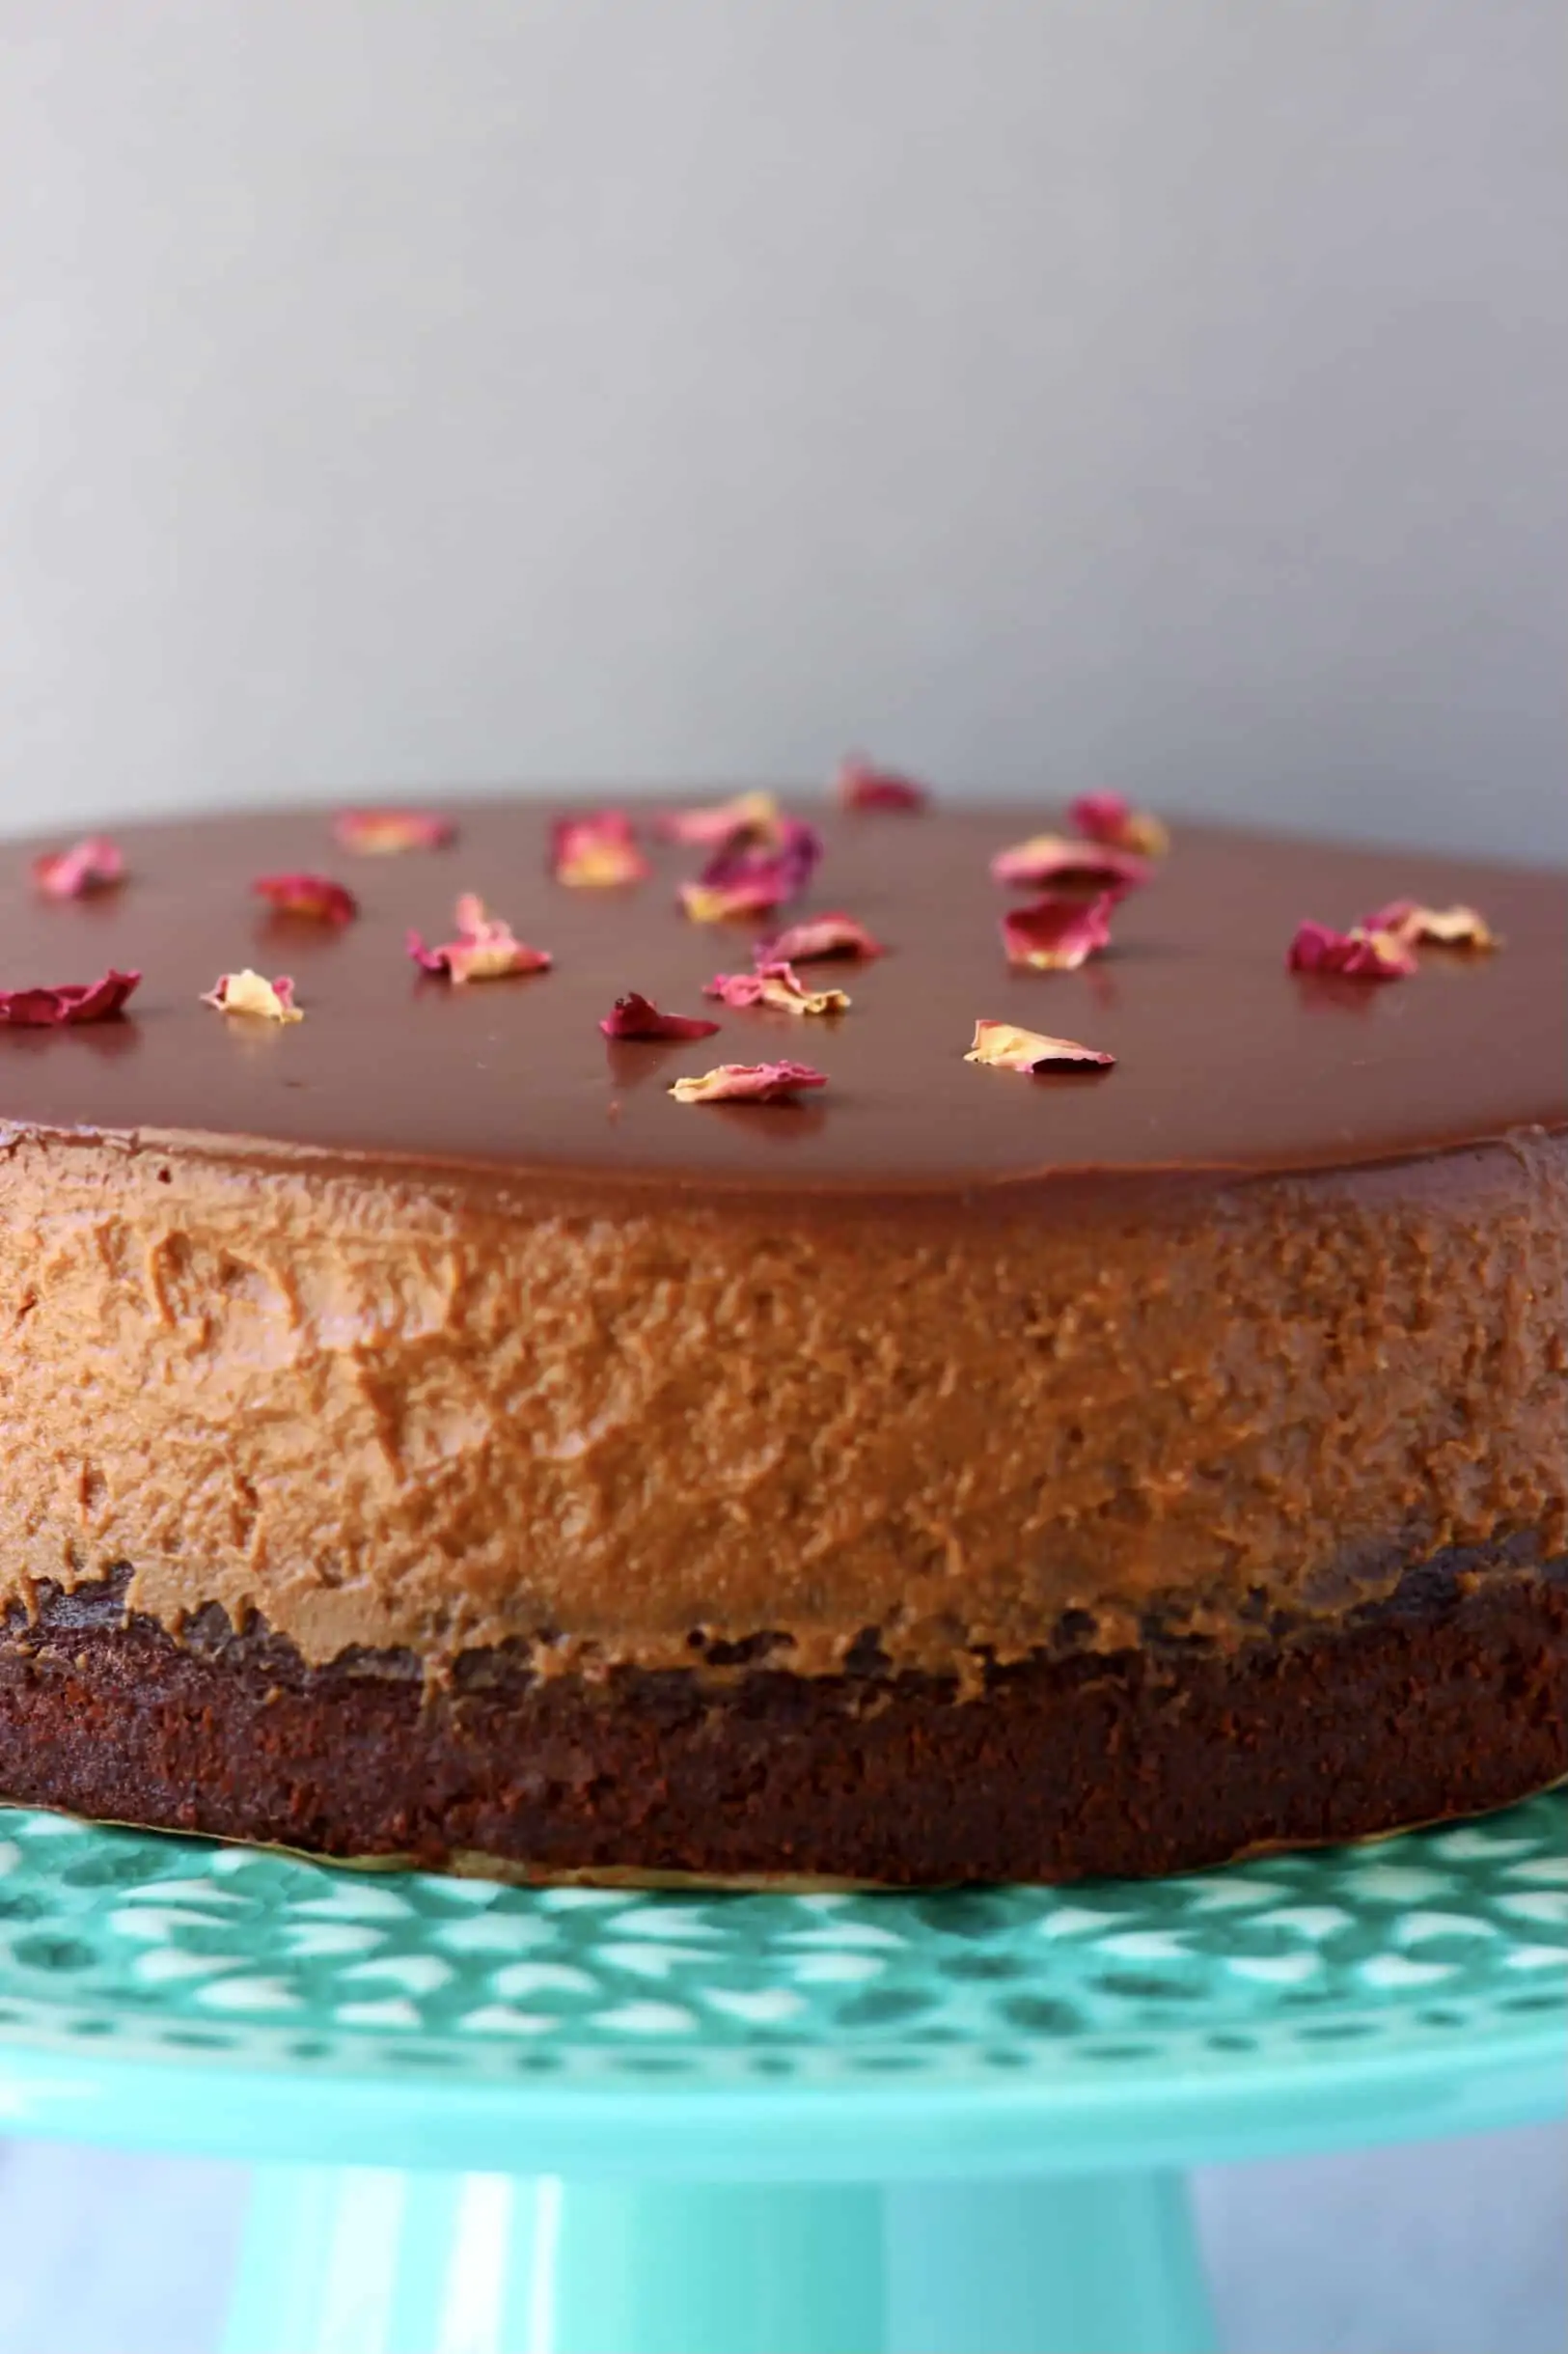 A gluten-free vegan chocolate mousse cake on a cake stand